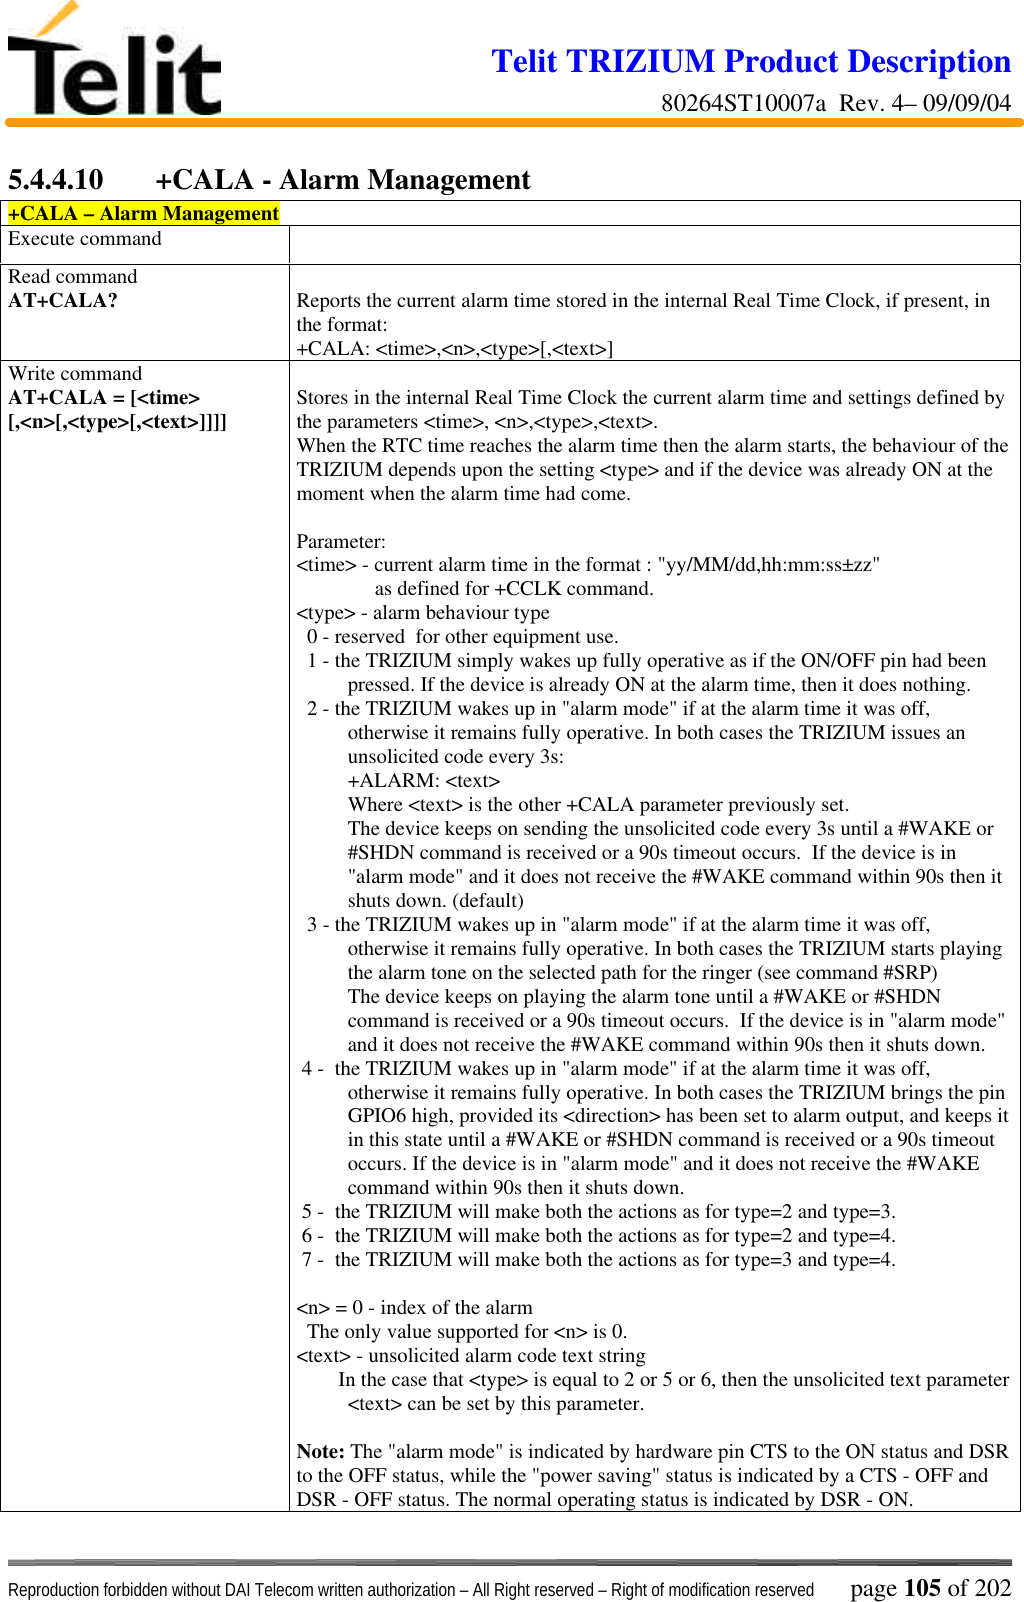 Telit TRIZIUM Product Description80264ST10007a  Rev. 4– 09/09/04Reproduction forbidden without DAI Telecom written authorization – All Right reserved – Right of modification reserved page 105 of 2025.4.4.10 +CALA - Alarm Management+CALA – Alarm ManagementExecute commandRead commandAT+CALA? Reports the current alarm time stored in the internal Real Time Clock, if present, inthe format:+CALA: &lt;time&gt;,&lt;n&gt;,&lt;type&gt;[,&lt;text&gt;]Write commandAT+CALA = [&lt;time&gt;[,&lt;n&gt;[,&lt;type&gt;[,&lt;text&gt;]]]] Stores in the internal Real Time Clock the current alarm time and settings defined bythe parameters &lt;time&gt;, &lt;n&gt;,&lt;type&gt;,&lt;text&gt;.When the RTC time reaches the alarm time then the alarm starts, the behaviour of theTRIZIUM depends upon the setting &lt;type&gt; and if the device was already ON at themoment when the alarm time had come.Parameter:&lt;time&gt; - current alarm time in the format : &quot;yy/MM/dd,hh:mm:ss±zz&quot;               as defined for +CCLK command.&lt;type&gt; - alarm behaviour type  0 - reserved  for other equipment use.  1 - the TRIZIUM simply wakes up fully operative as if the ON/OFF pin had beenpressed. If the device is already ON at the alarm time, then it does nothing.  2 - the TRIZIUM wakes up in &quot;alarm mode&quot; if at the alarm time it was off,otherwise it remains fully operative. In both cases the TRIZIUM issues anunsolicited code every 3s:+ALARM: &lt;text&gt;Where &lt;text&gt; is the other +CALA parameter previously set.The device keeps on sending the unsolicited code every 3s until a #WAKE or#SHDN command is received or a 90s timeout occurs.  If the device is in&quot;alarm mode&quot; and it does not receive the #WAKE command within 90s then itshuts down. (default)  3 - the TRIZIUM wakes up in &quot;alarm mode&quot; if at the alarm time it was off,otherwise it remains fully operative. In both cases the TRIZIUM starts playingthe alarm tone on the selected path for the ringer (see command #SRP)The device keeps on playing the alarm tone until a #WAKE or #SHDNcommand is received or a 90s timeout occurs.  If the device is in &quot;alarm mode&quot;and it does not receive the #WAKE command within 90s then it shuts down. 4 -  the TRIZIUM wakes up in &quot;alarm mode&quot; if at the alarm time it was off,otherwise it remains fully operative. In both cases the TRIZIUM brings the pinGPIO6 high, provided its &lt;direction&gt; has been set to alarm output, and keeps itin this state until a #WAKE or #SHDN command is received or a 90s timeoutoccurs. If the device is in &quot;alarm mode&quot; and it does not receive the #WAKEcommand within 90s then it shuts down. 5 -  the TRIZIUM will make both the actions as for type=2 and type=3. 6 -  the TRIZIUM will make both the actions as for type=2 and type=4. 7 -  the TRIZIUM will make both the actions as for type=3 and type=4.&lt;n&gt; = 0 - index of the alarm  The only value supported for &lt;n&gt; is 0.&lt;text&gt; - unsolicited alarm code text string        In the case that &lt;type&gt; is equal to 2 or 5 or 6, then the unsolicited text parameter&lt;text&gt; can be set by this parameter.Note: The &quot;alarm mode&quot; is indicated by hardware pin CTS to the ON status and DSRto the OFF status, while the &quot;power saving&quot; status is indicated by a CTS - OFF andDSR - OFF status. The normal operating status is indicated by DSR - ON.